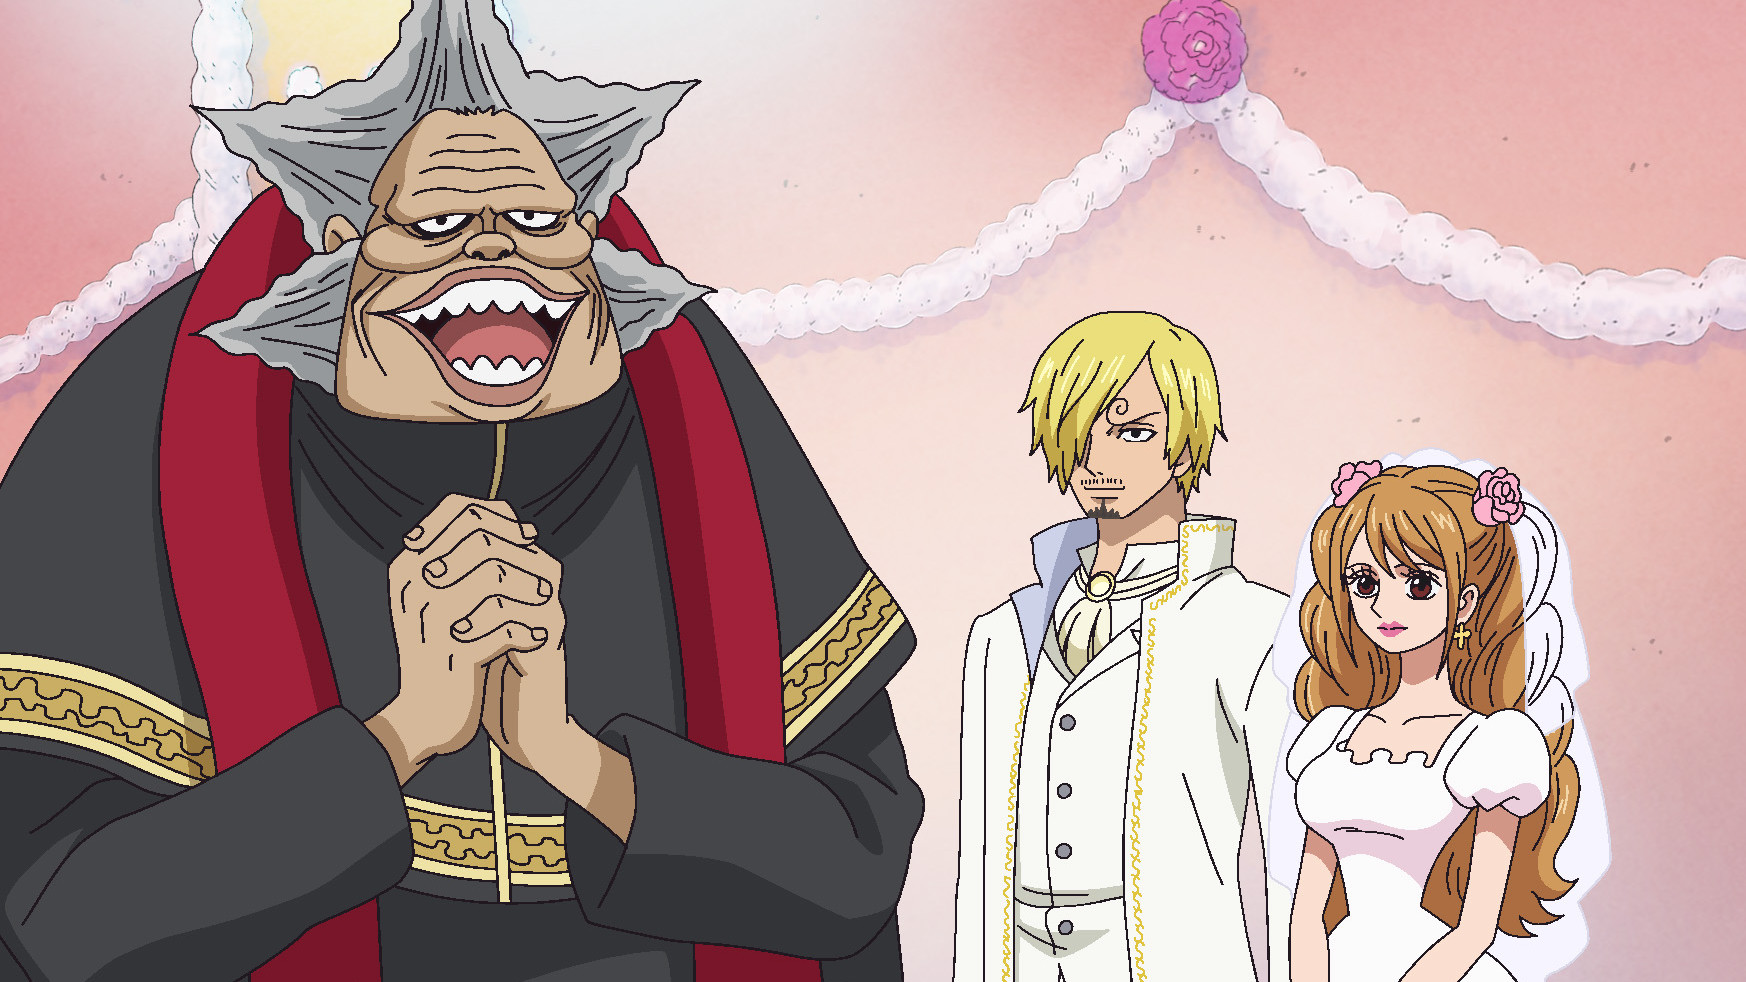 One Piece: Whole Cake Island (783-878) The Broken Couple! Sanji and Pudding  Enter! - Watch on Crunchyroll